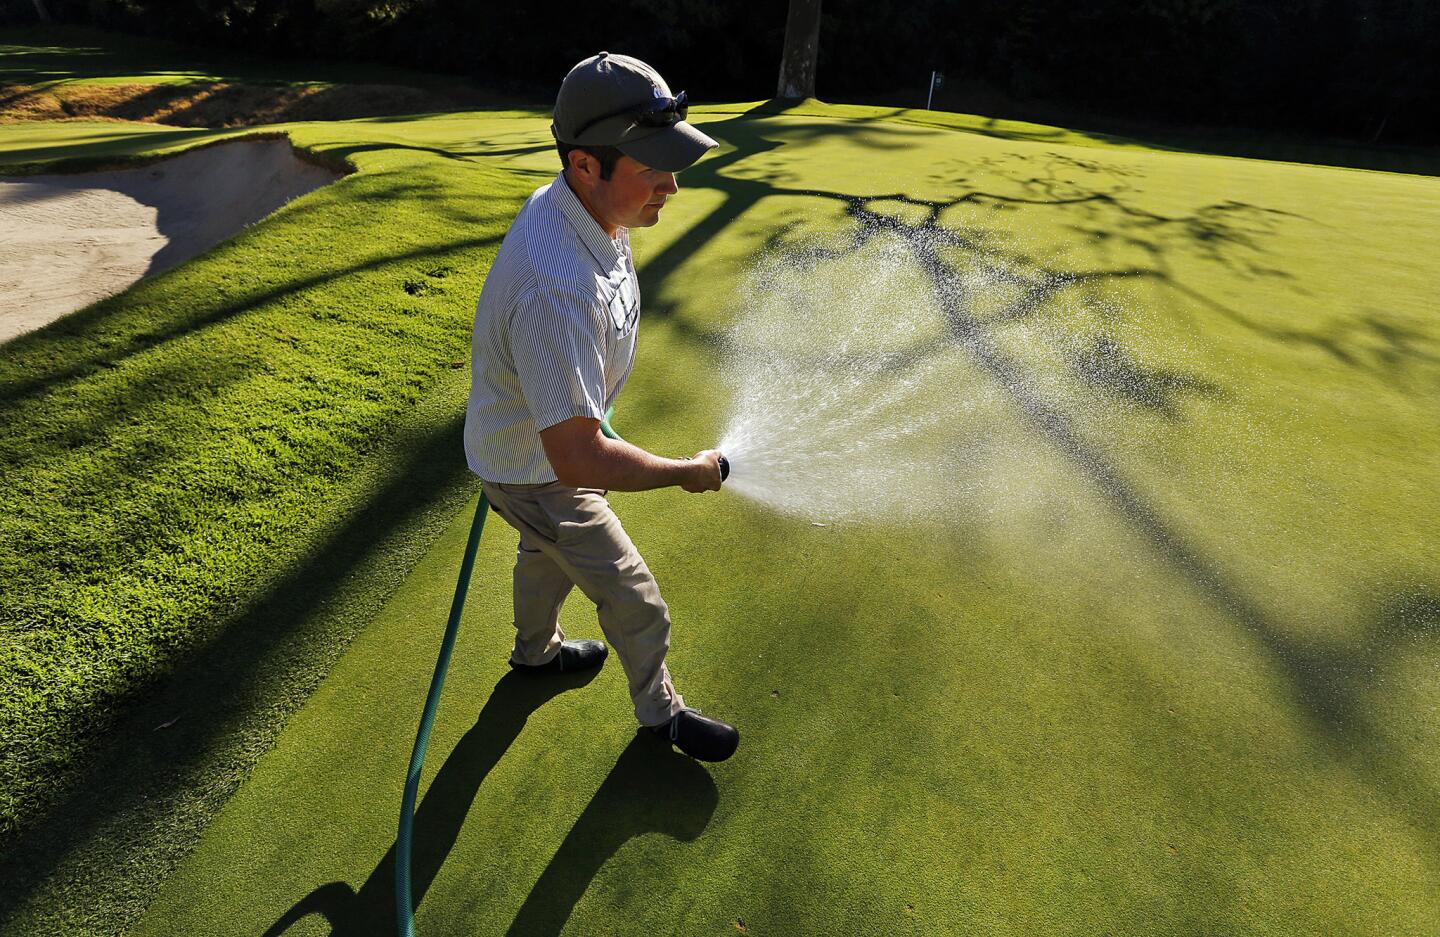 Jordan Gilmore, assistant superintendent at Riviera Country Club adds water by hand to the 12th green in the shadow of a sycamore tree known as "Bogart's tree" as the course prepares to host the Northern Trust Open.